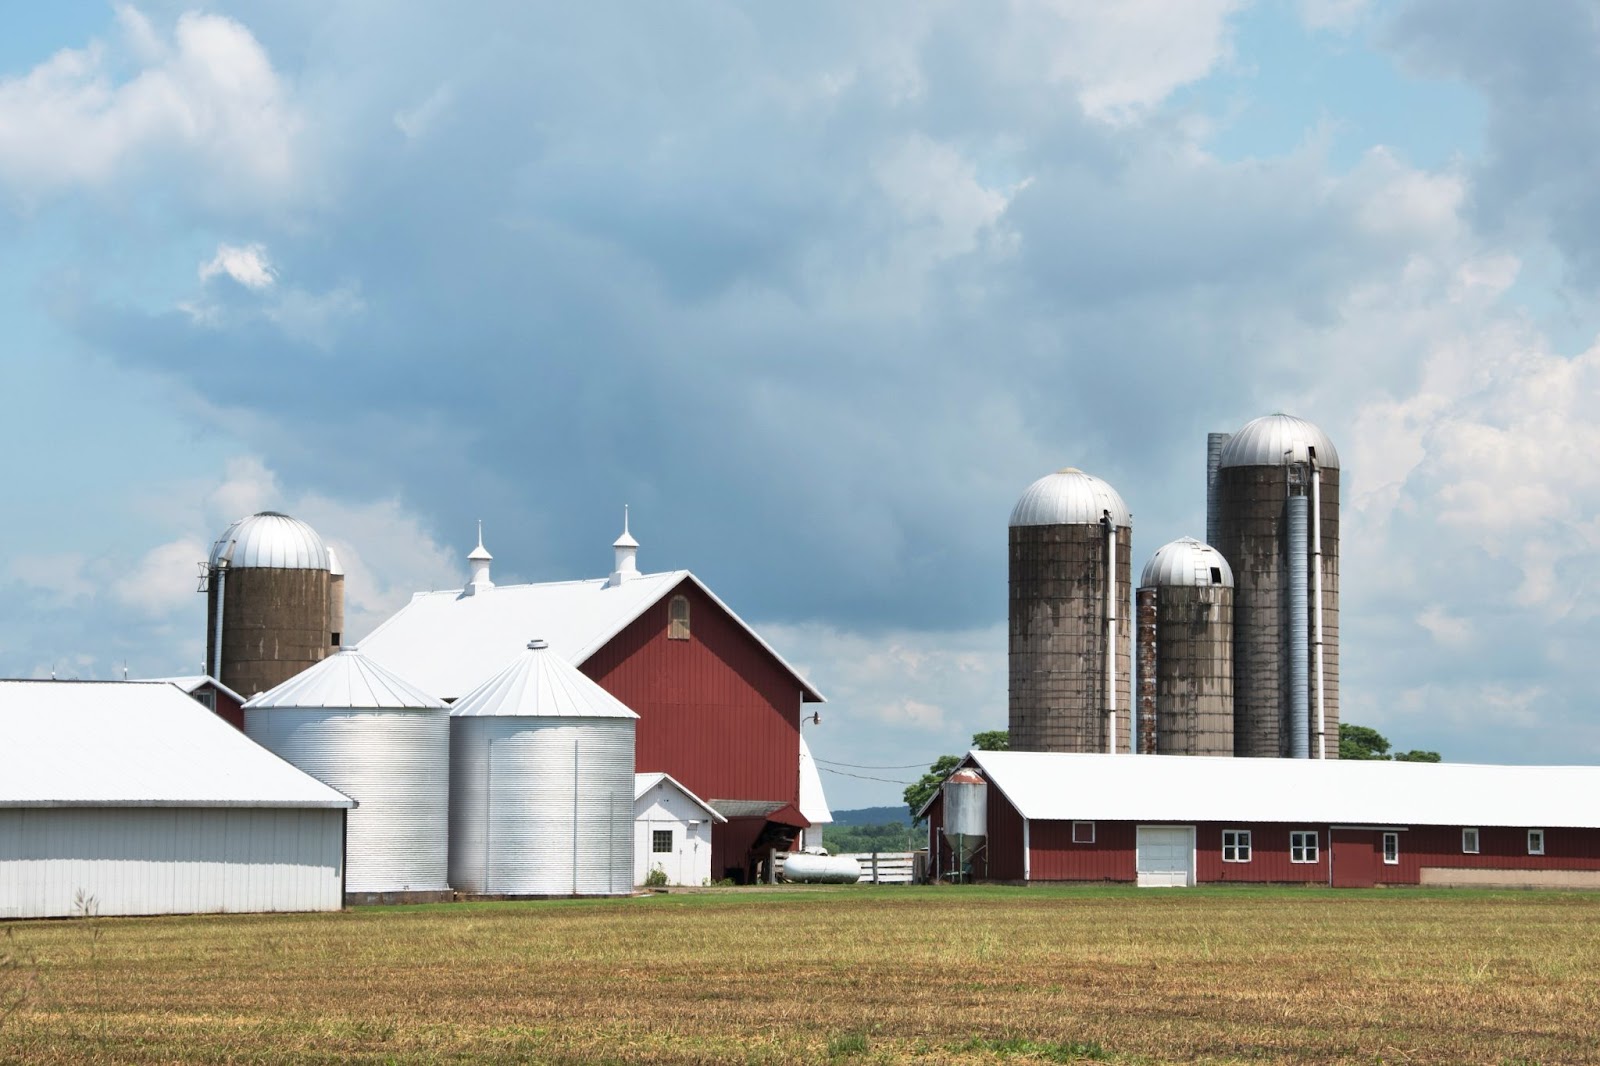 Why Do Farmers And Ranchers Prefer Steel For Agricultural Buildings?